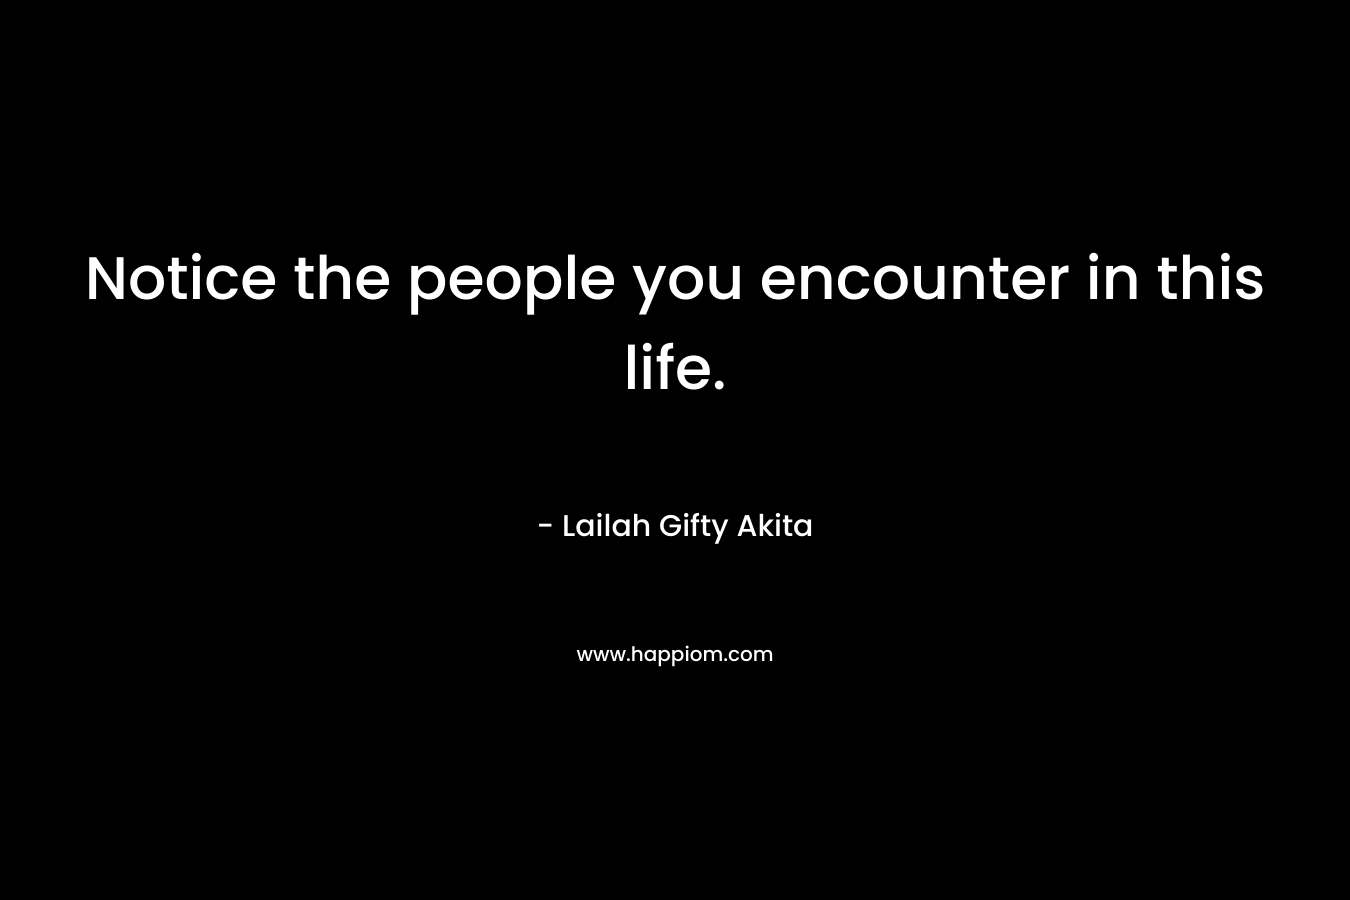 Notice the people you encounter in this life. – Lailah Gifty Akita